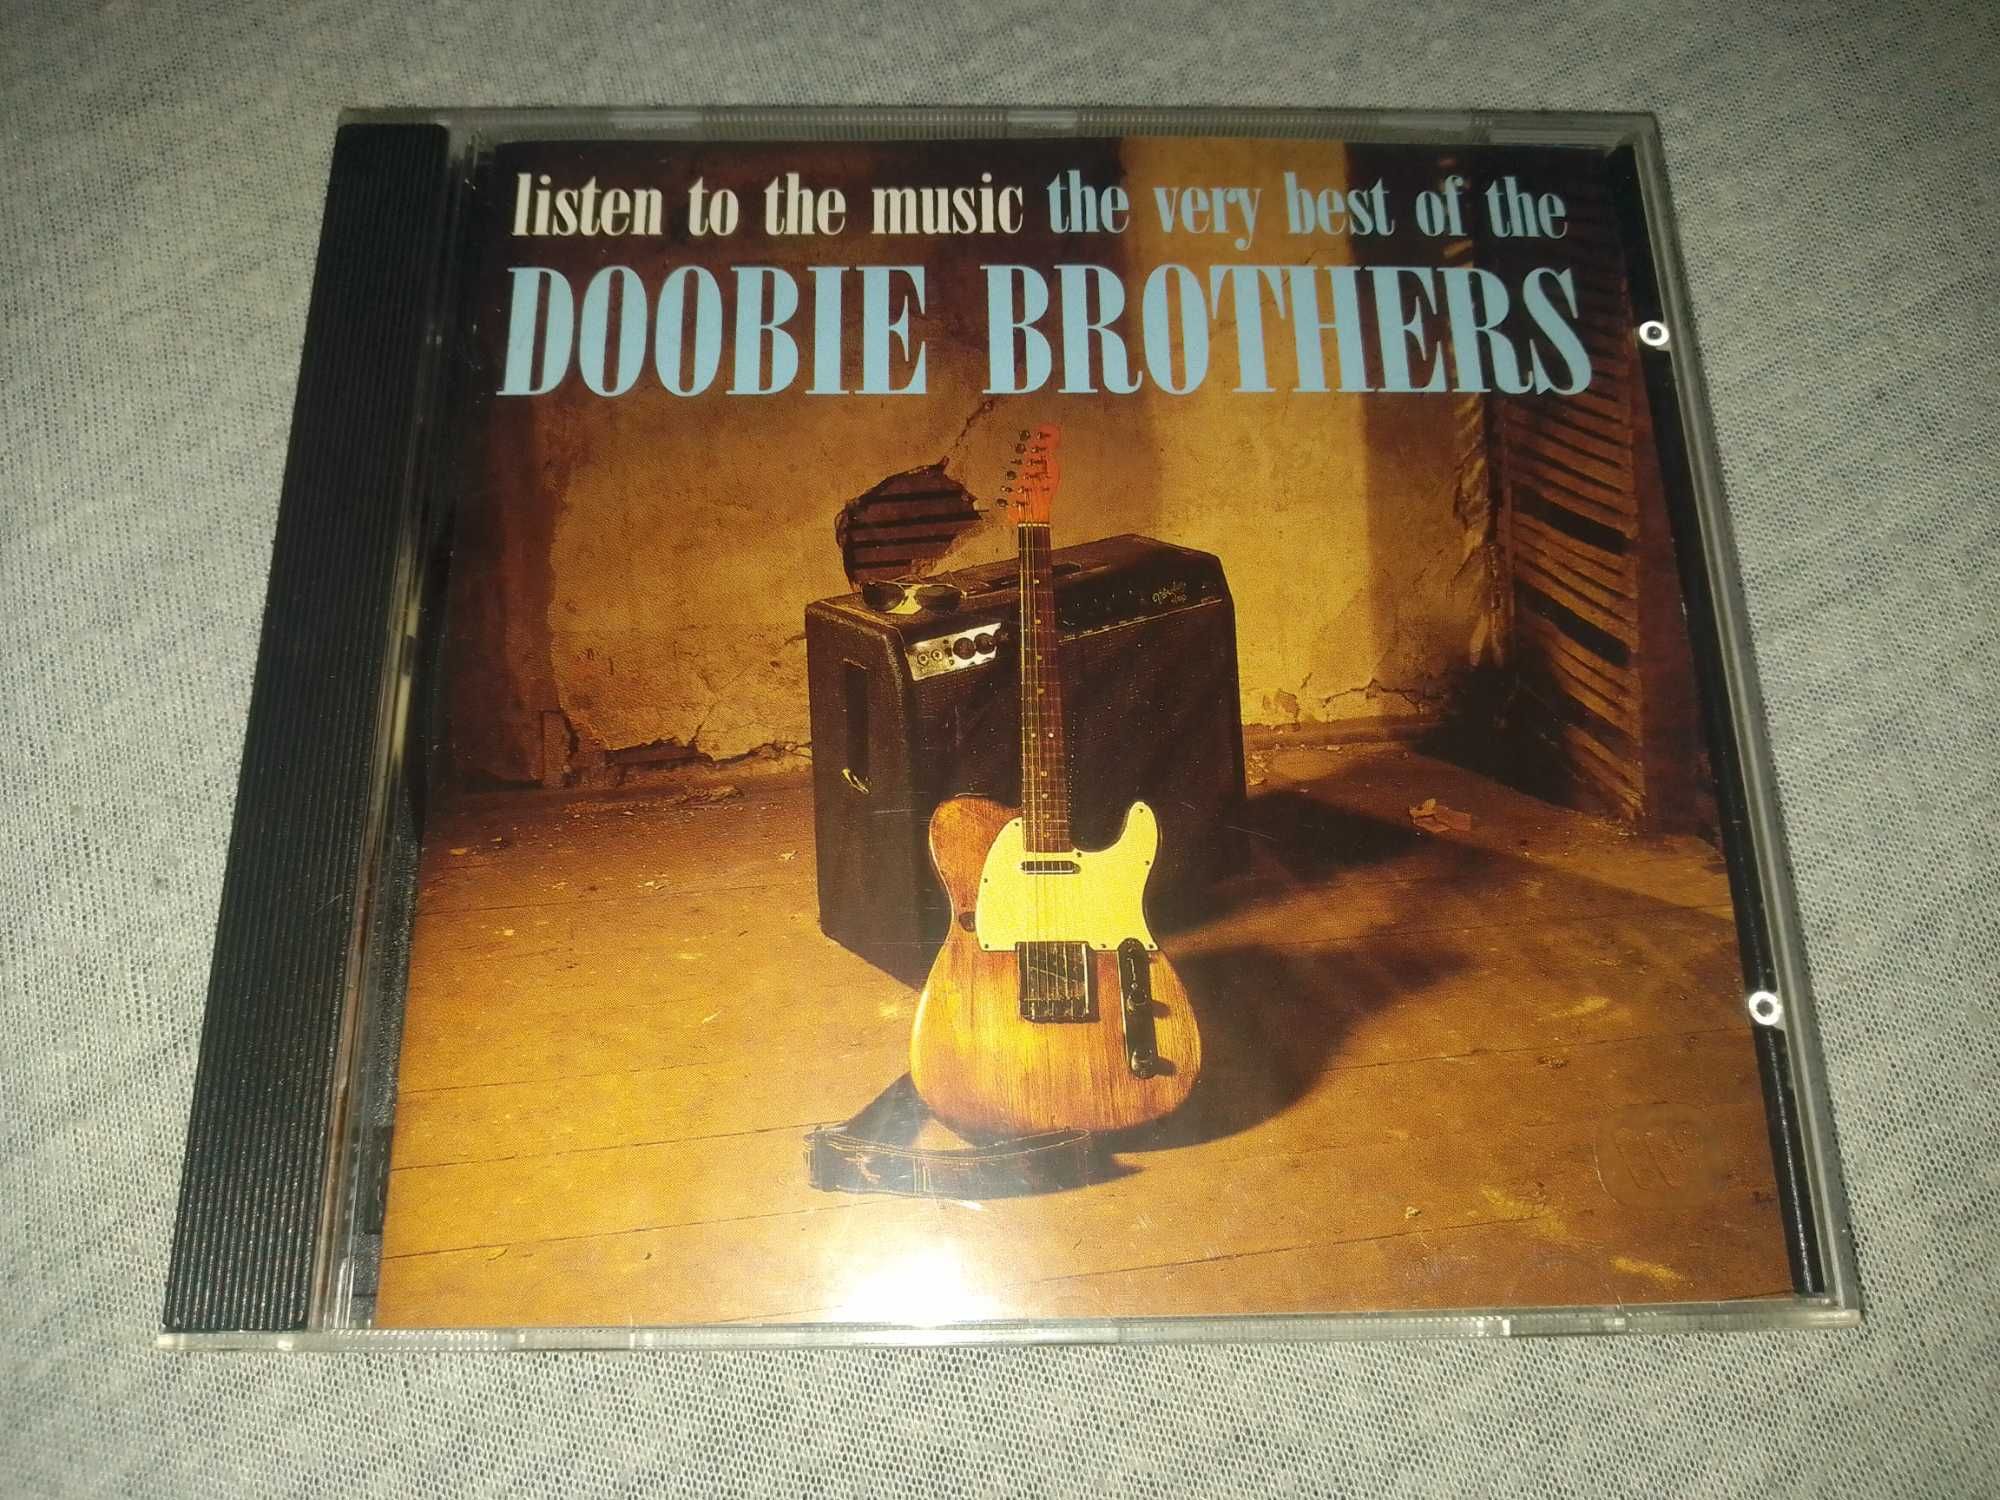 The Doobie Brothers "Listen To The Music" фирменный CD Made In Europe.